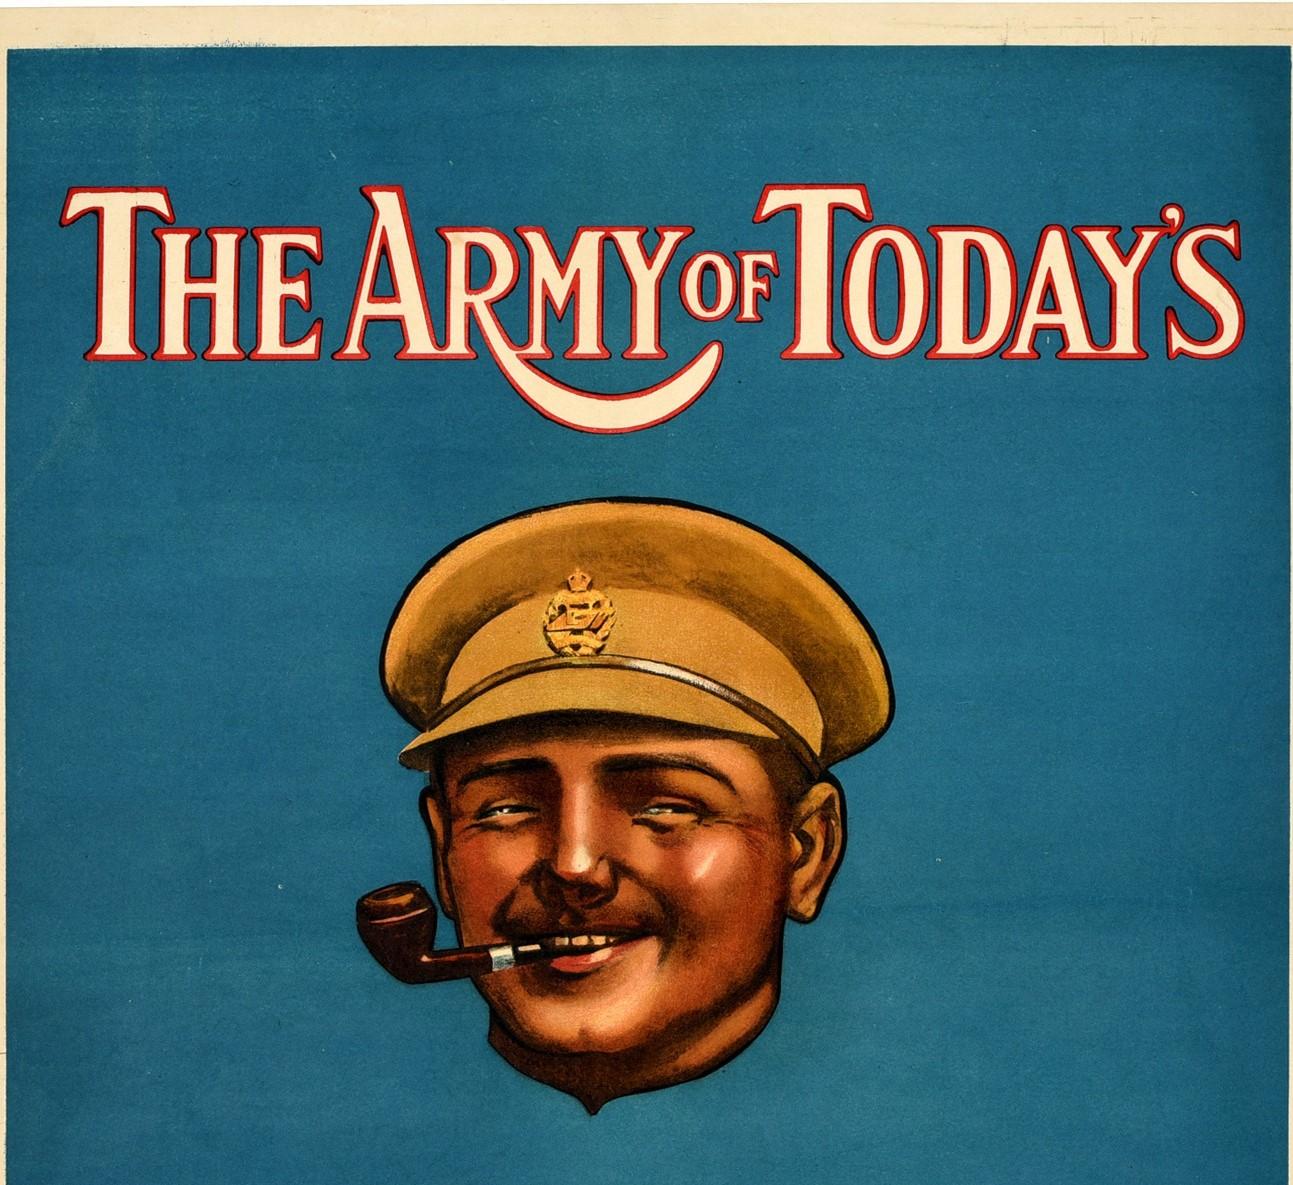 Original Antique Poster The Army Of Today's All Right British Army Recruitment - Print by Unknown